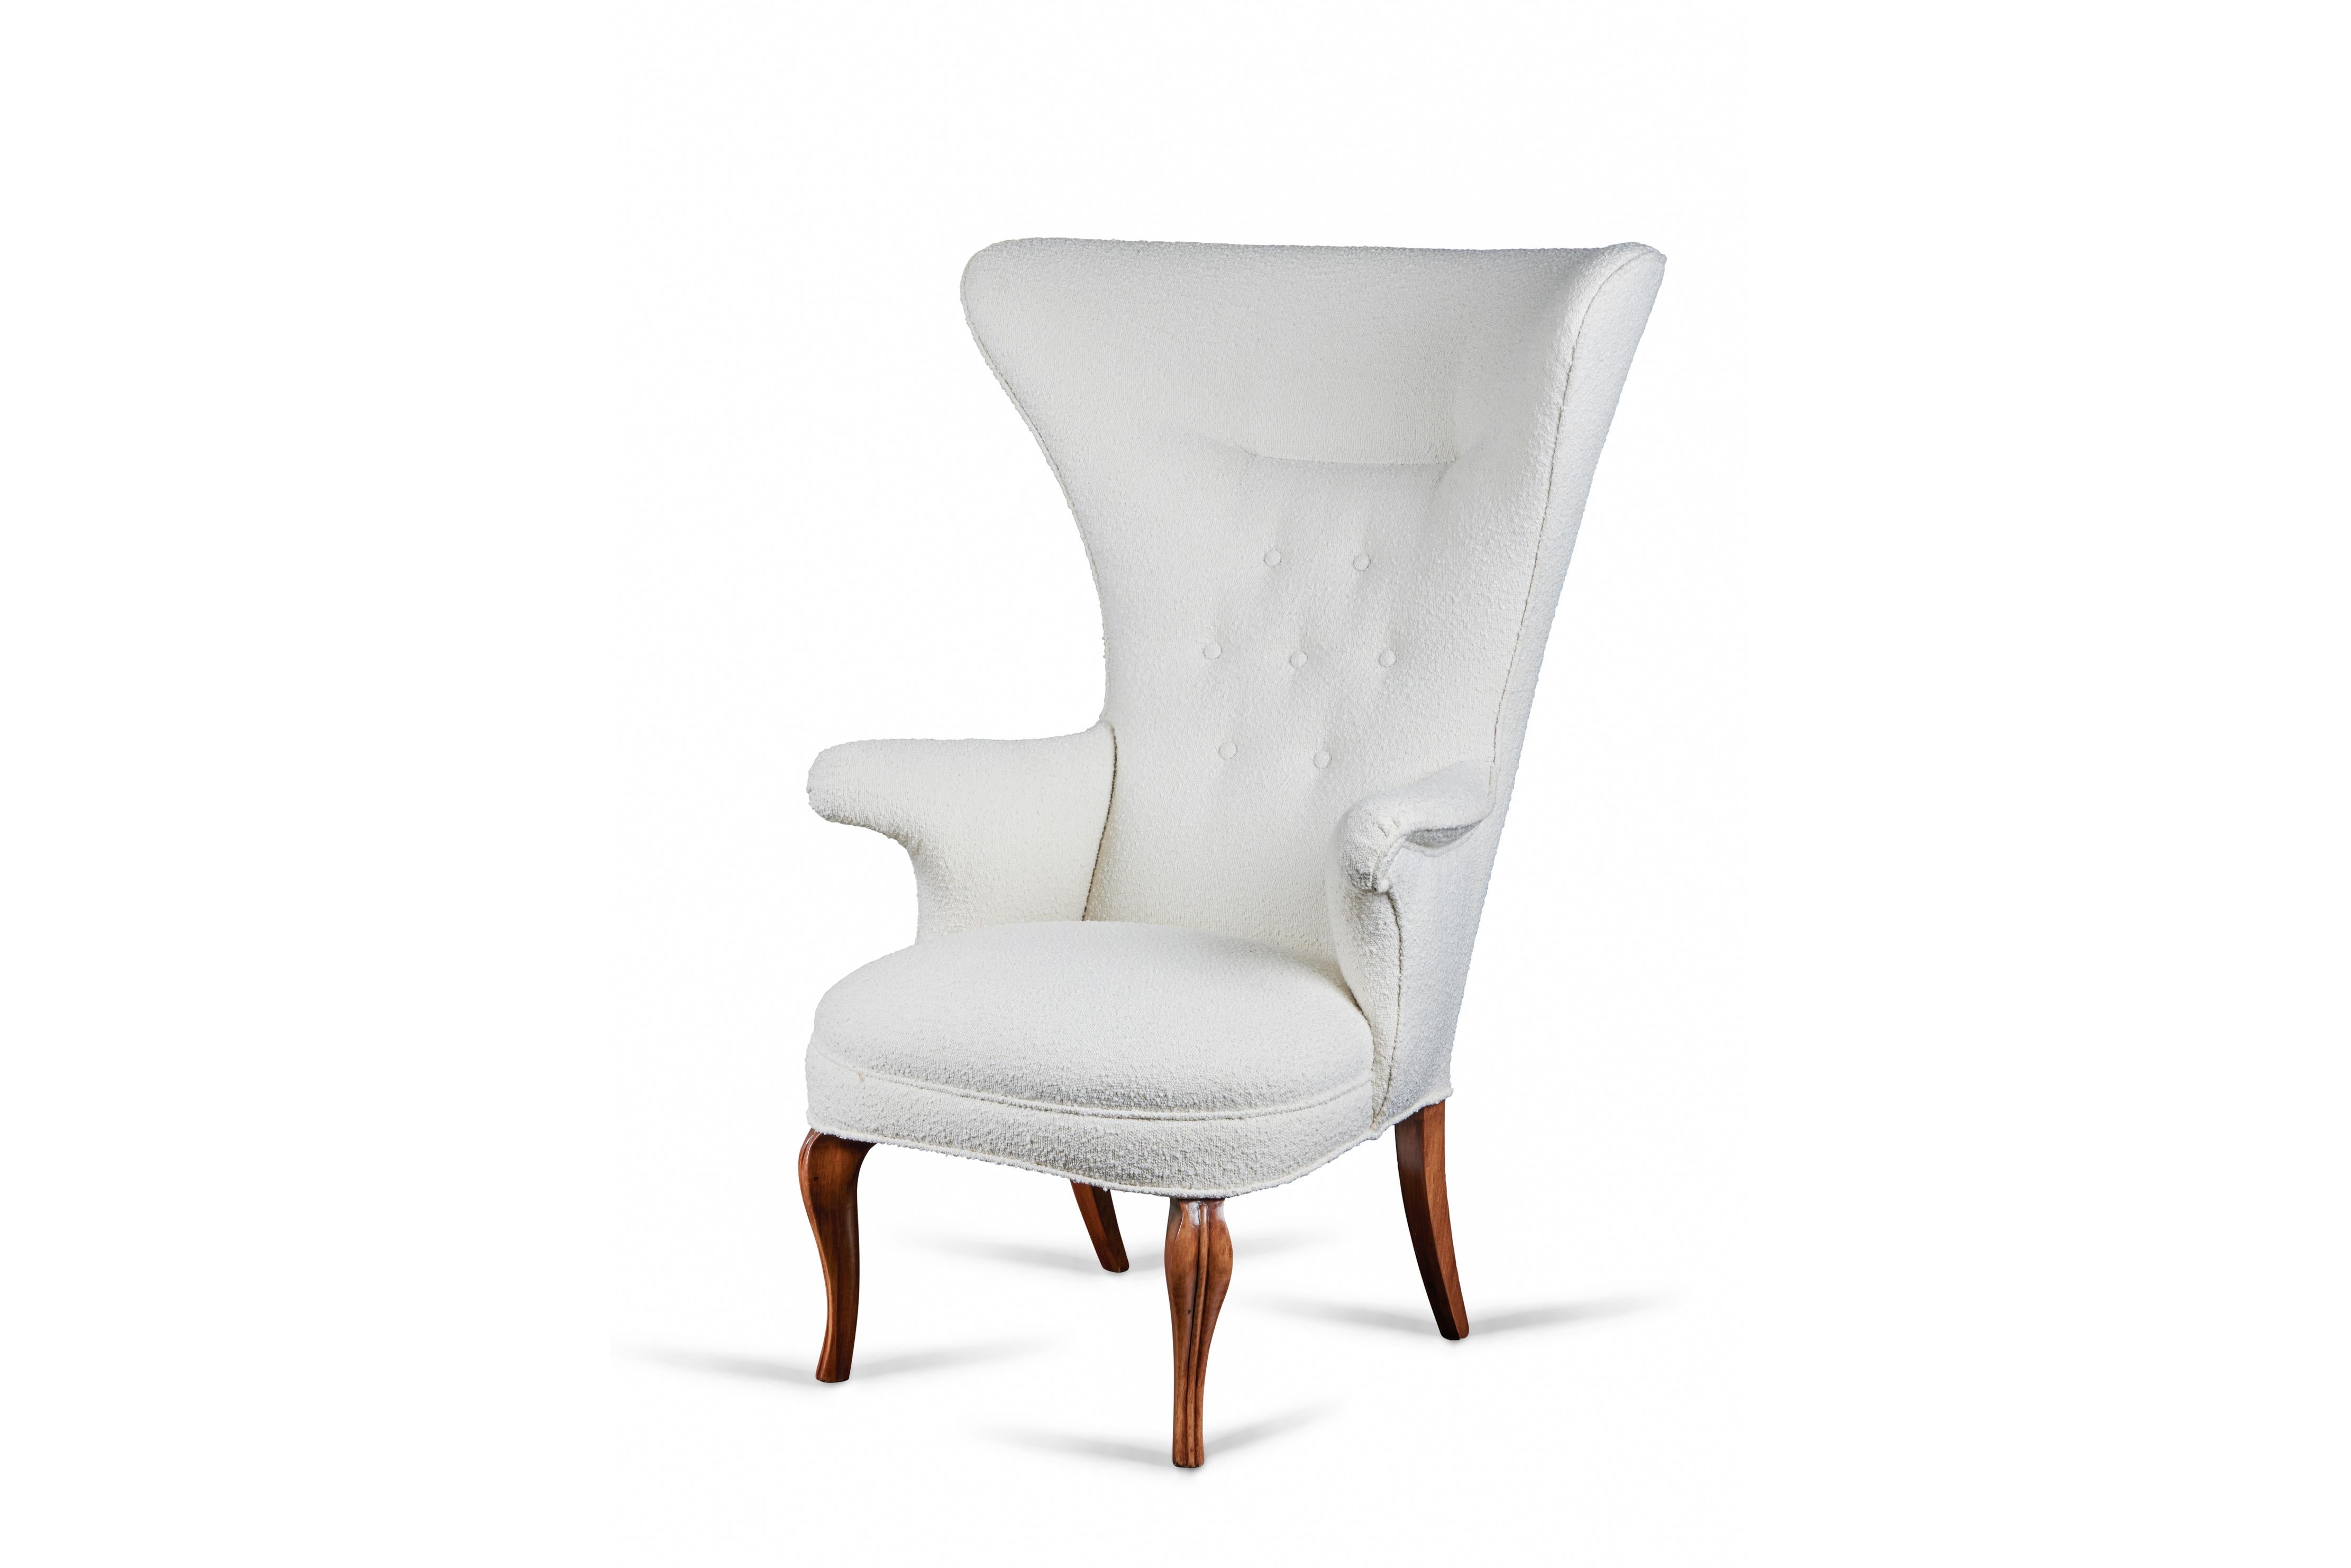 Dramatic and sculptural wing chair in the style of Fritz Henningsen, from the estate of French fashion designer Christian Audigier. Newly re-upholstered in an imported boucle fabric.